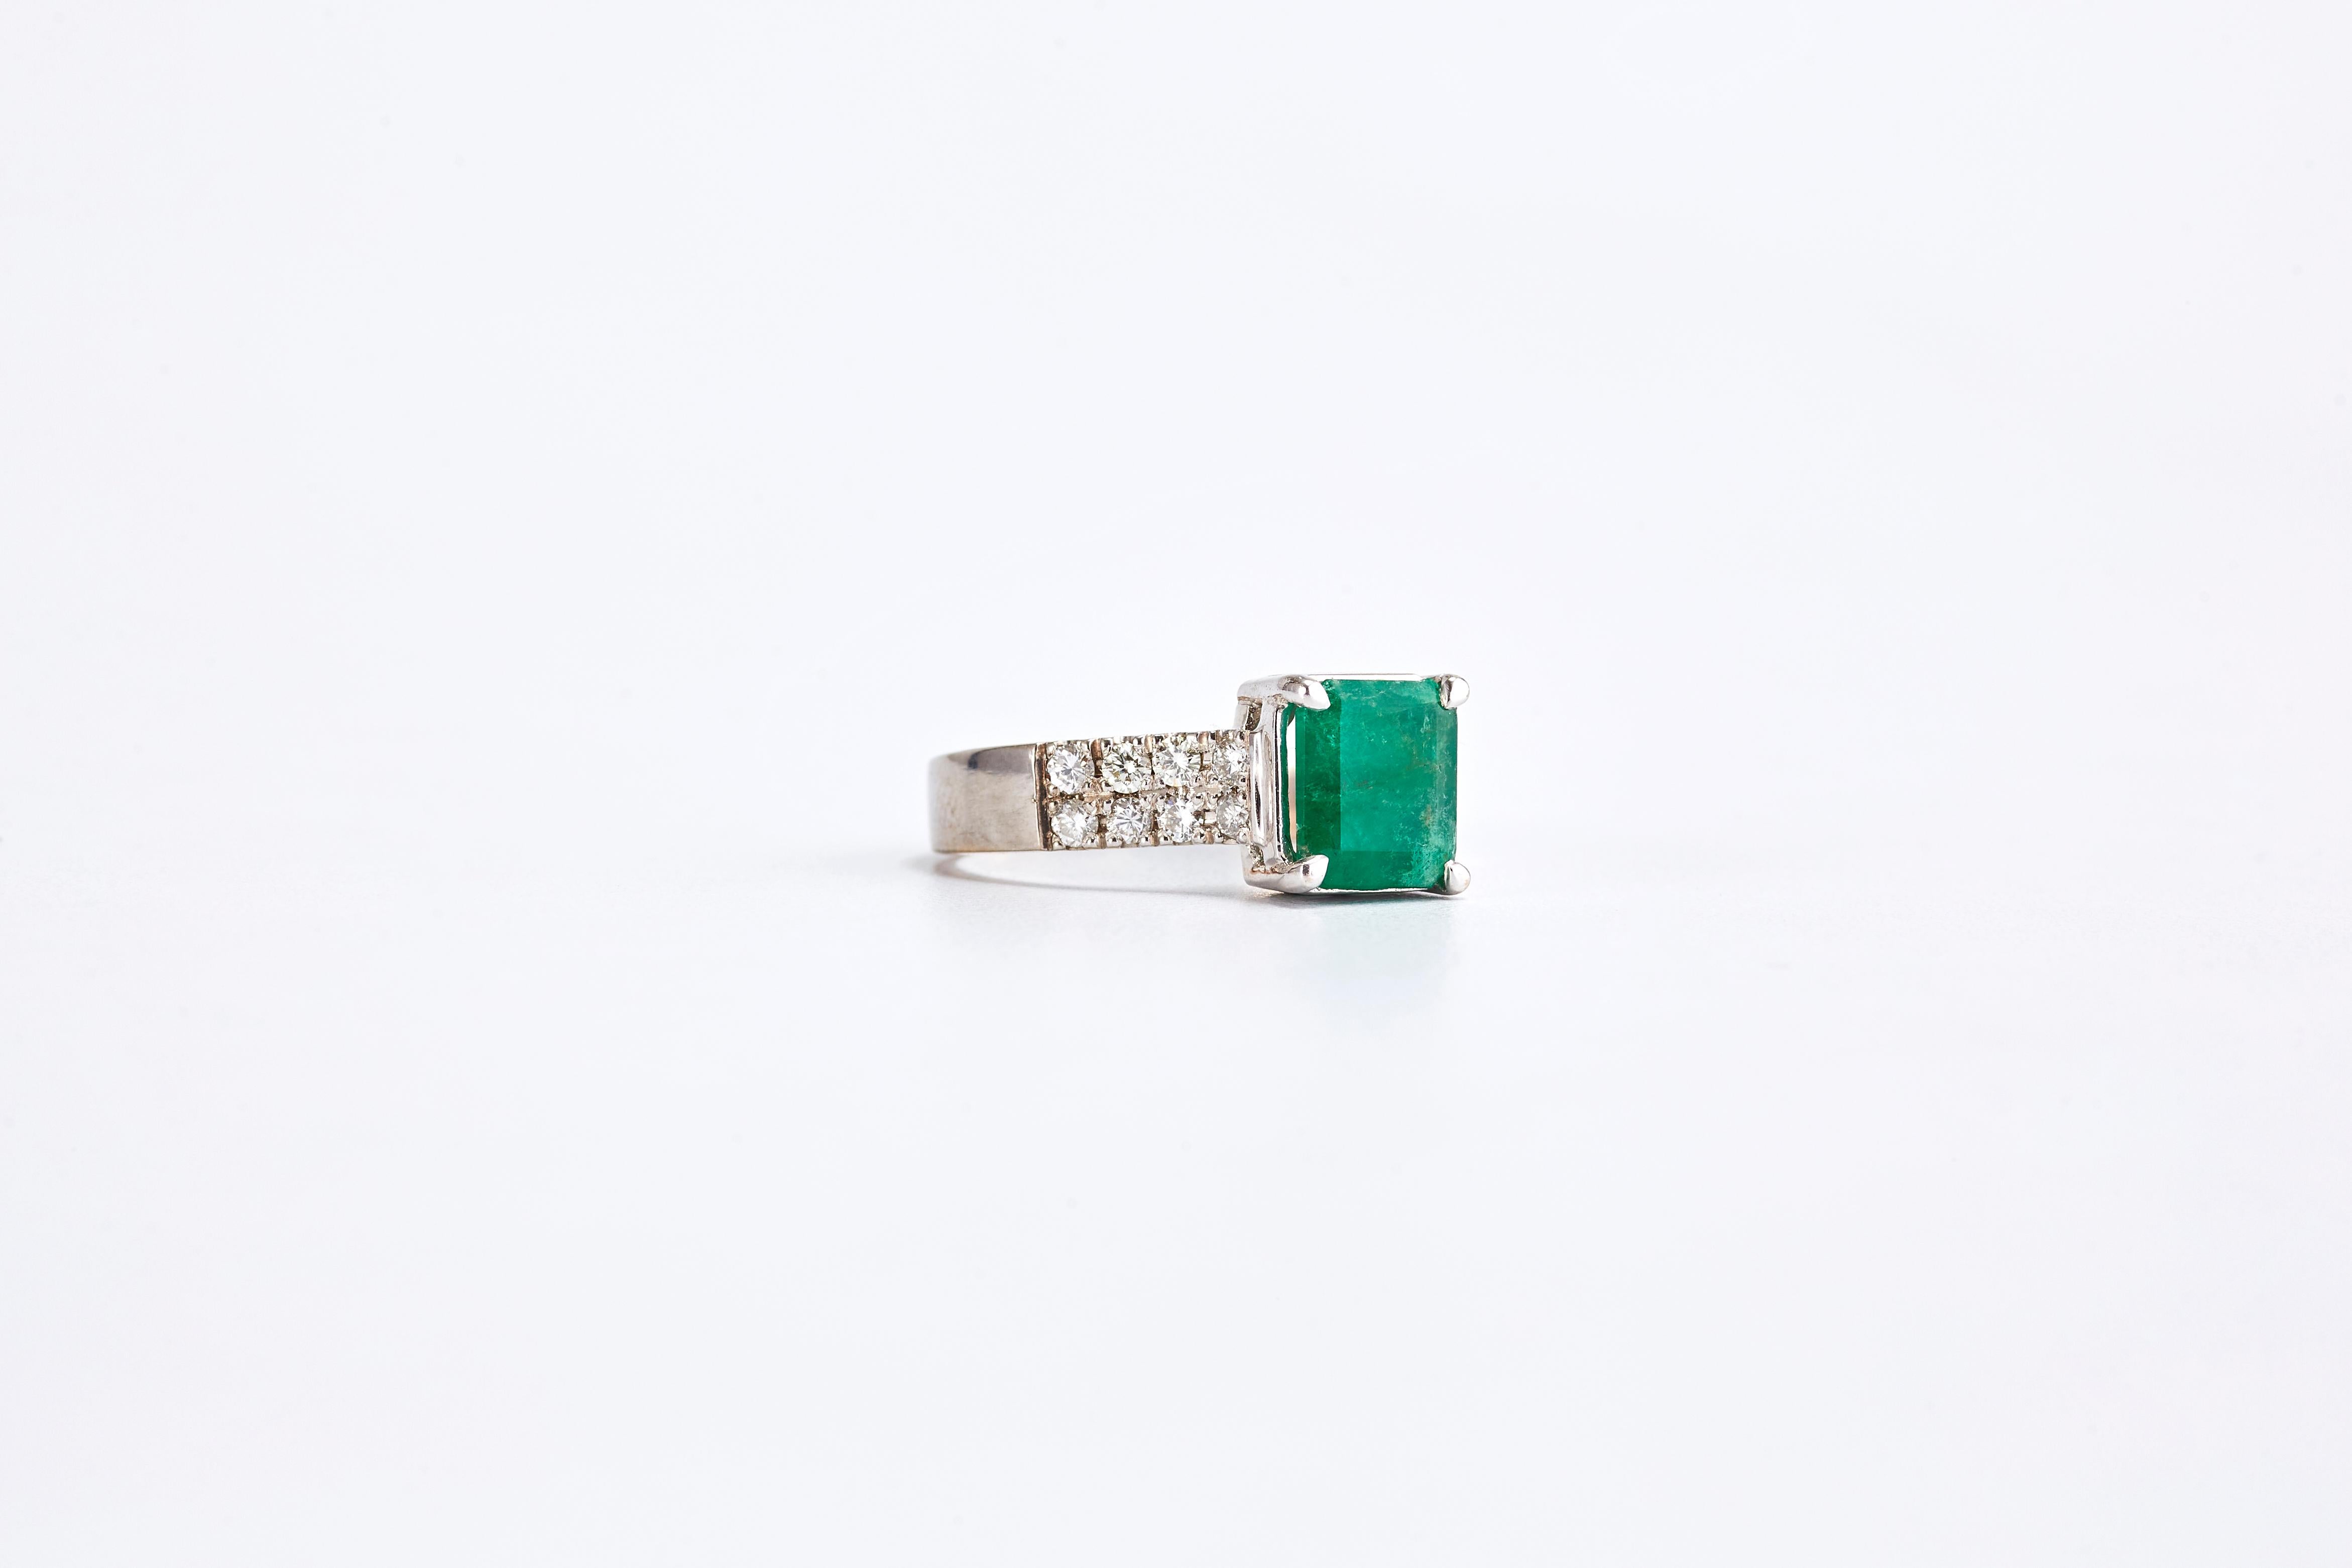 18 Karat White Gold Ring with 2.30 carat Square Cut Emerald and Diamonds
18K white gold ring with center stone square Emerald and 2 rows of gorgeous round diamonds.
The ring is set with quality diamonds G VS1 total of 0.90 ct. 
Emerald stone weight